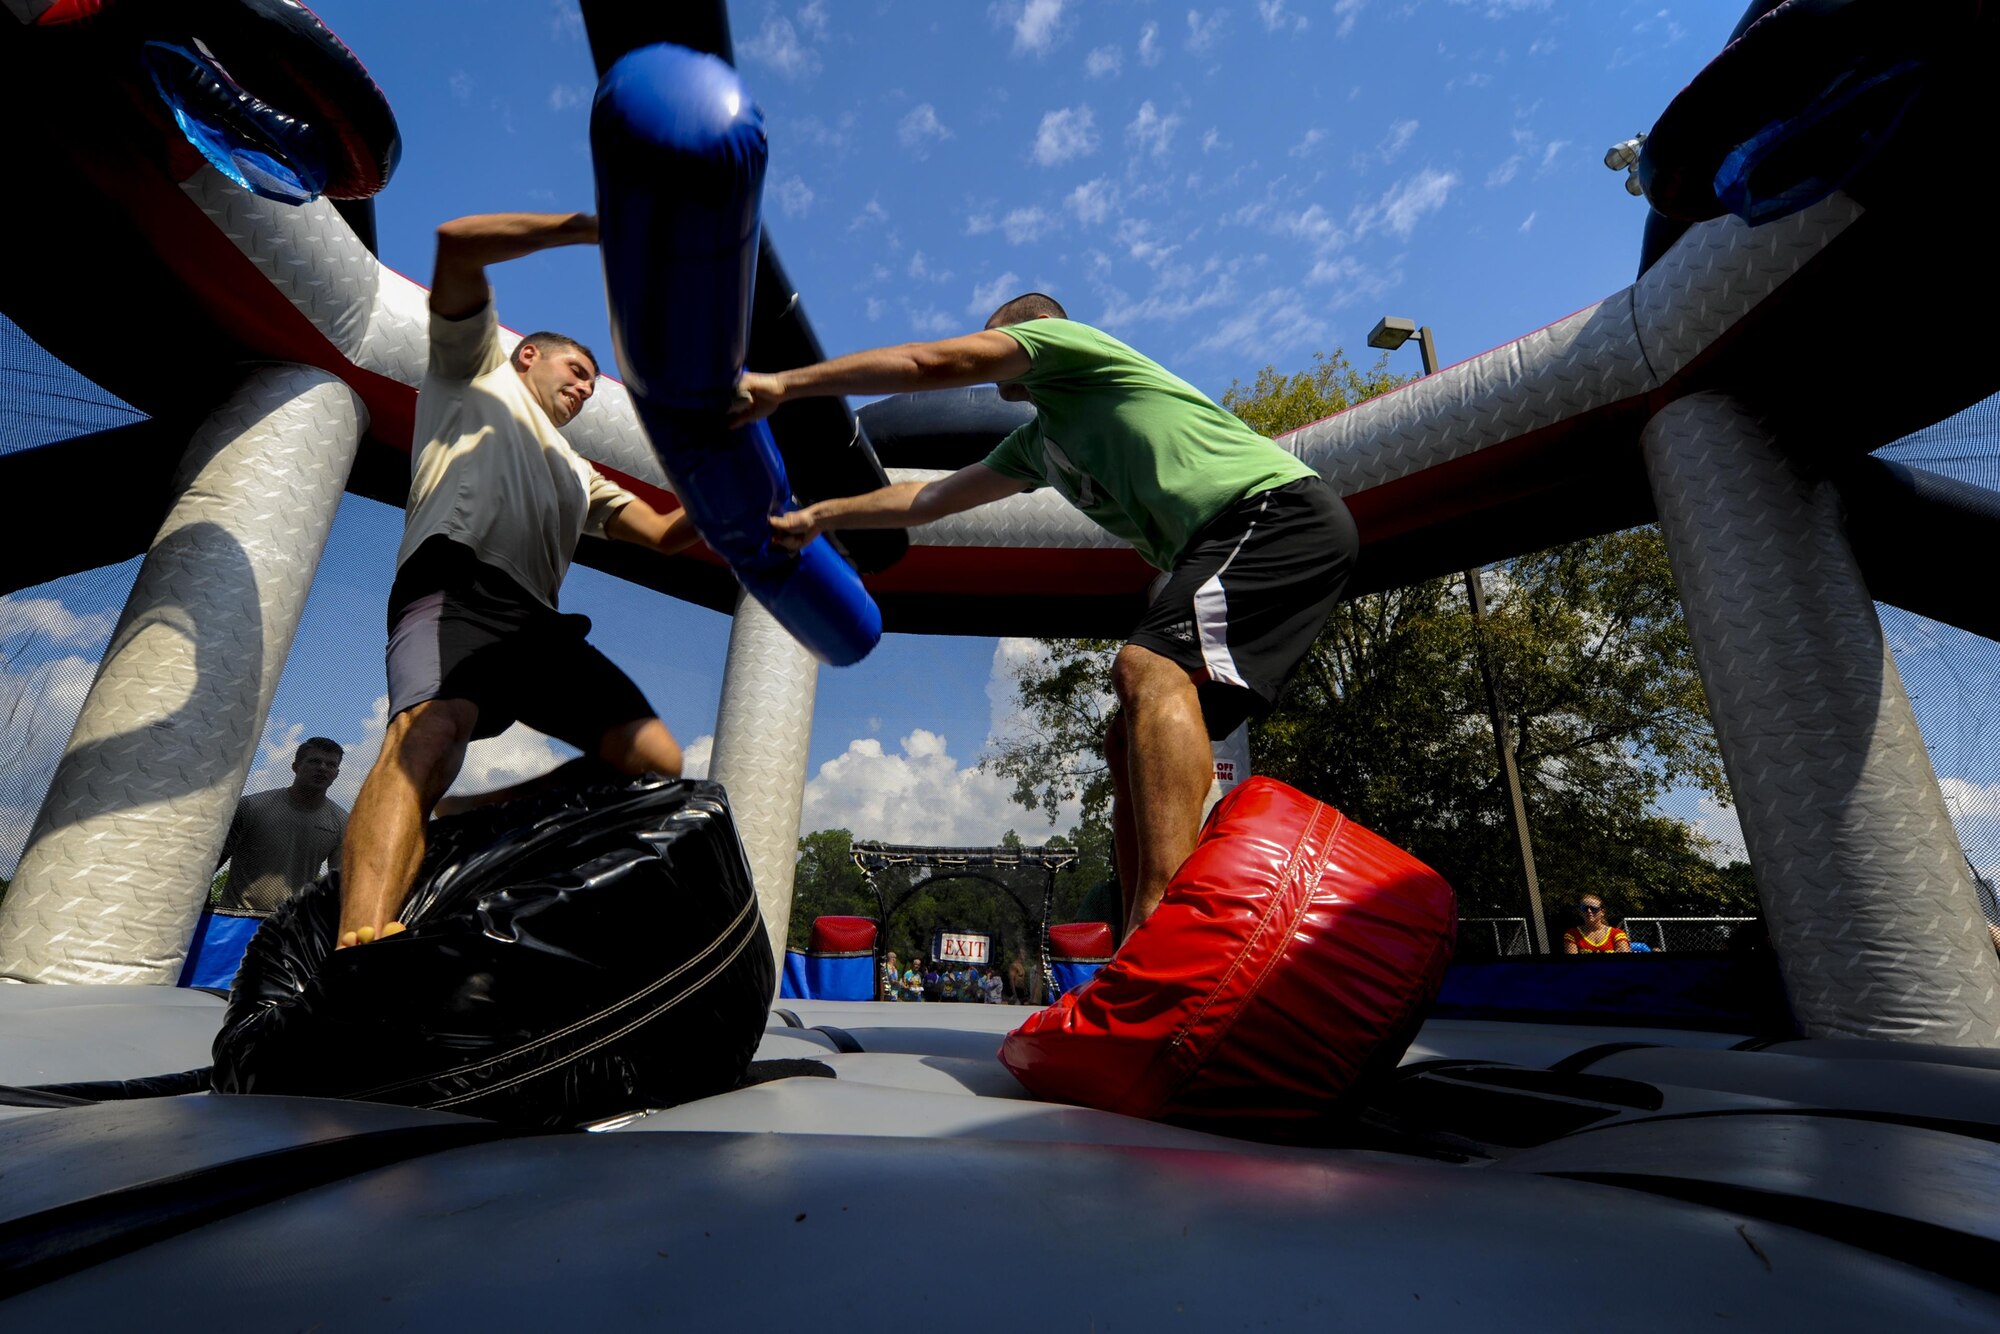 Air Commandos compete in a pugil stick competition during the Green Dot Olympics at Hurlburt Field, Fla., Sept. 28, 2016. Pugil stick sparring was one of several challenges in the event. Additional challenges included an ultimate obstacle course, combat hurdles and a sandbag carry.  (U.S. Air Force photo by Airman Dennis Spain)